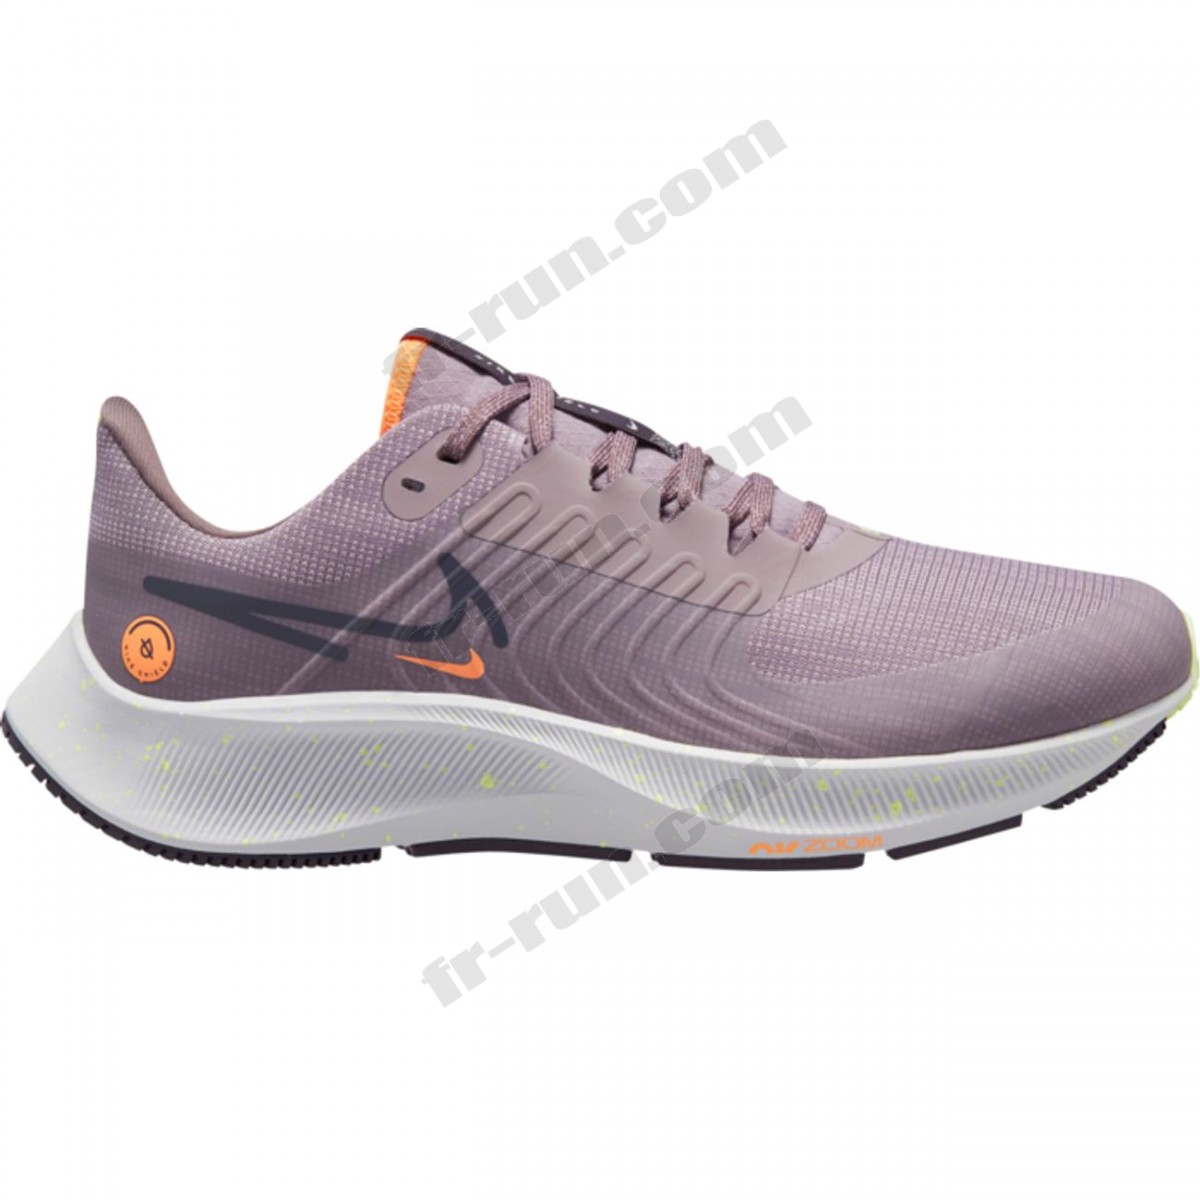 Nike/CHAUSSURES running femme NIKE W AIR ZOOM PEGASUS 38 SHIELD √ Nouveau style √ Soldes - Nike/CHAUSSURES running femme NIKE W AIR ZOOM PEGASUS 38 SHIELD √ Nouveau style √ Soldes